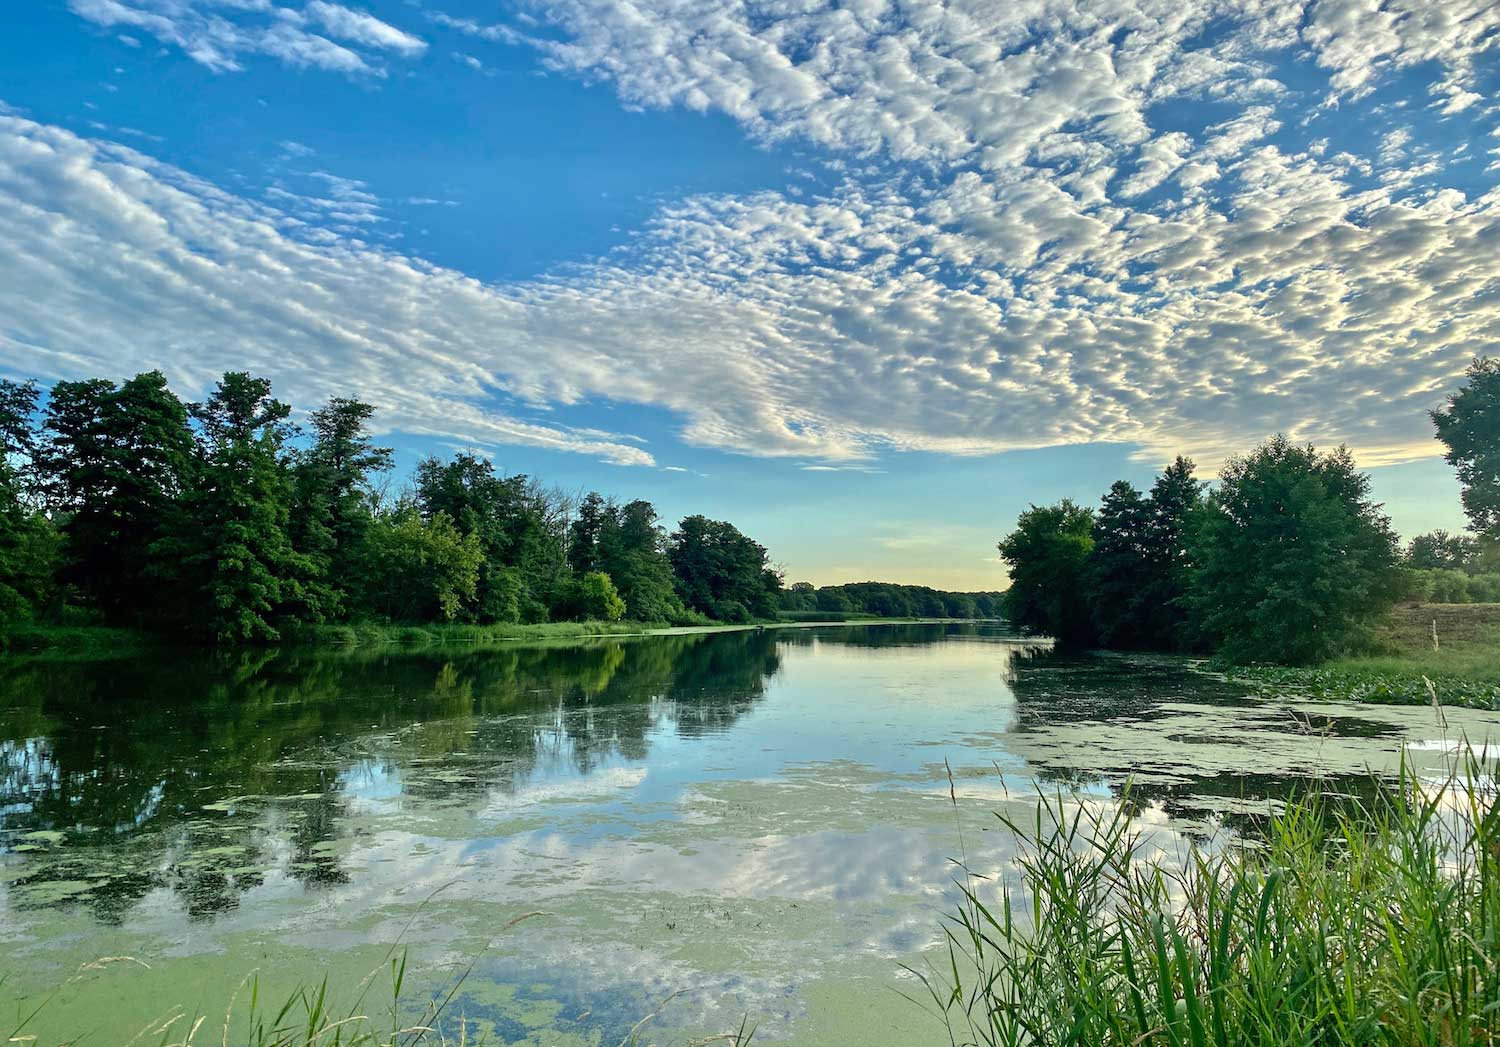 A river under a blue sky with puffy clouds.